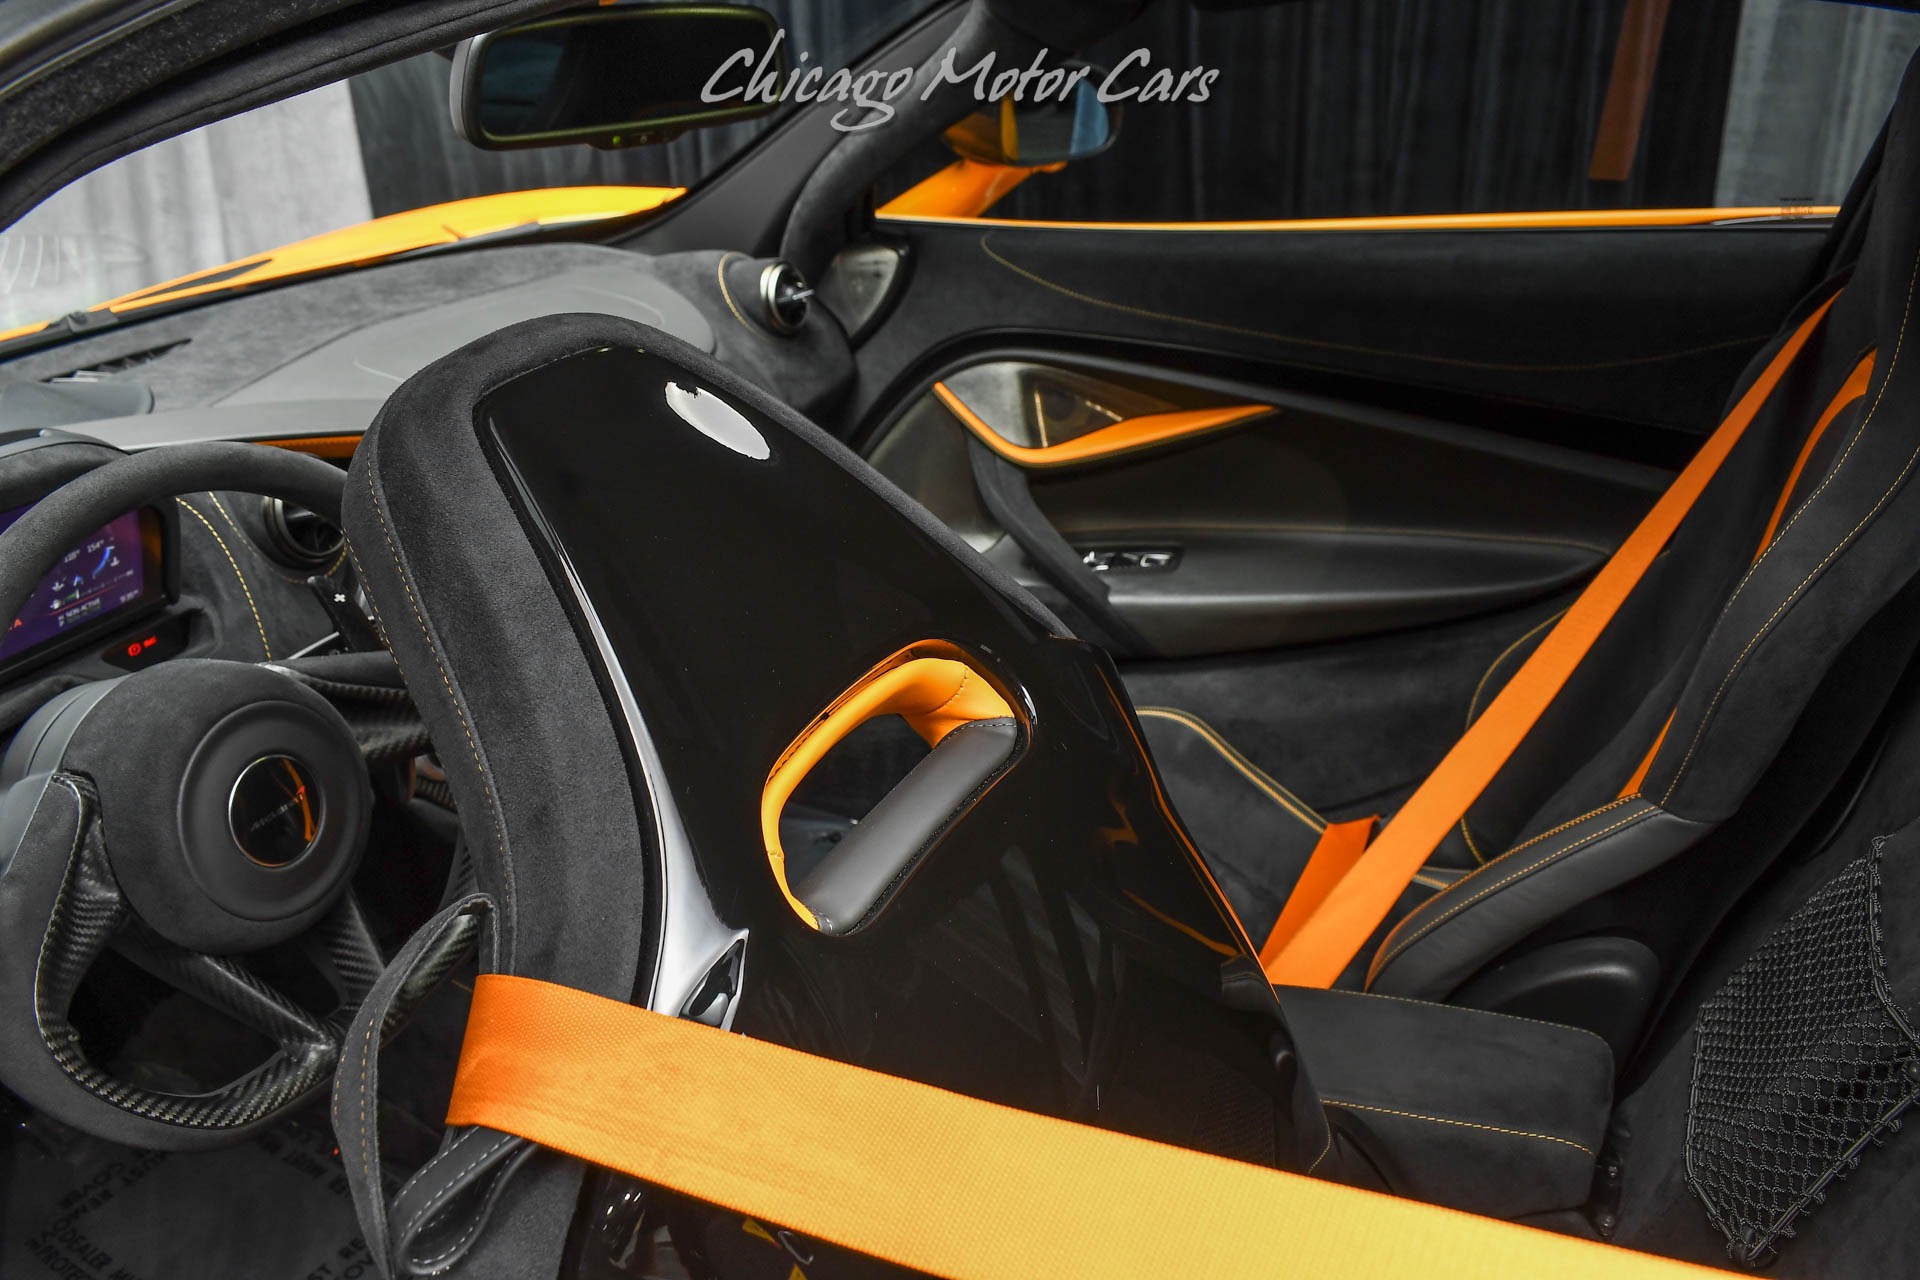 Used-2018-McLaren-720S-Performance-Coupe-RARE-Papaya-Spark-TONS-of-Carbon-FULL-PPF-LOADED